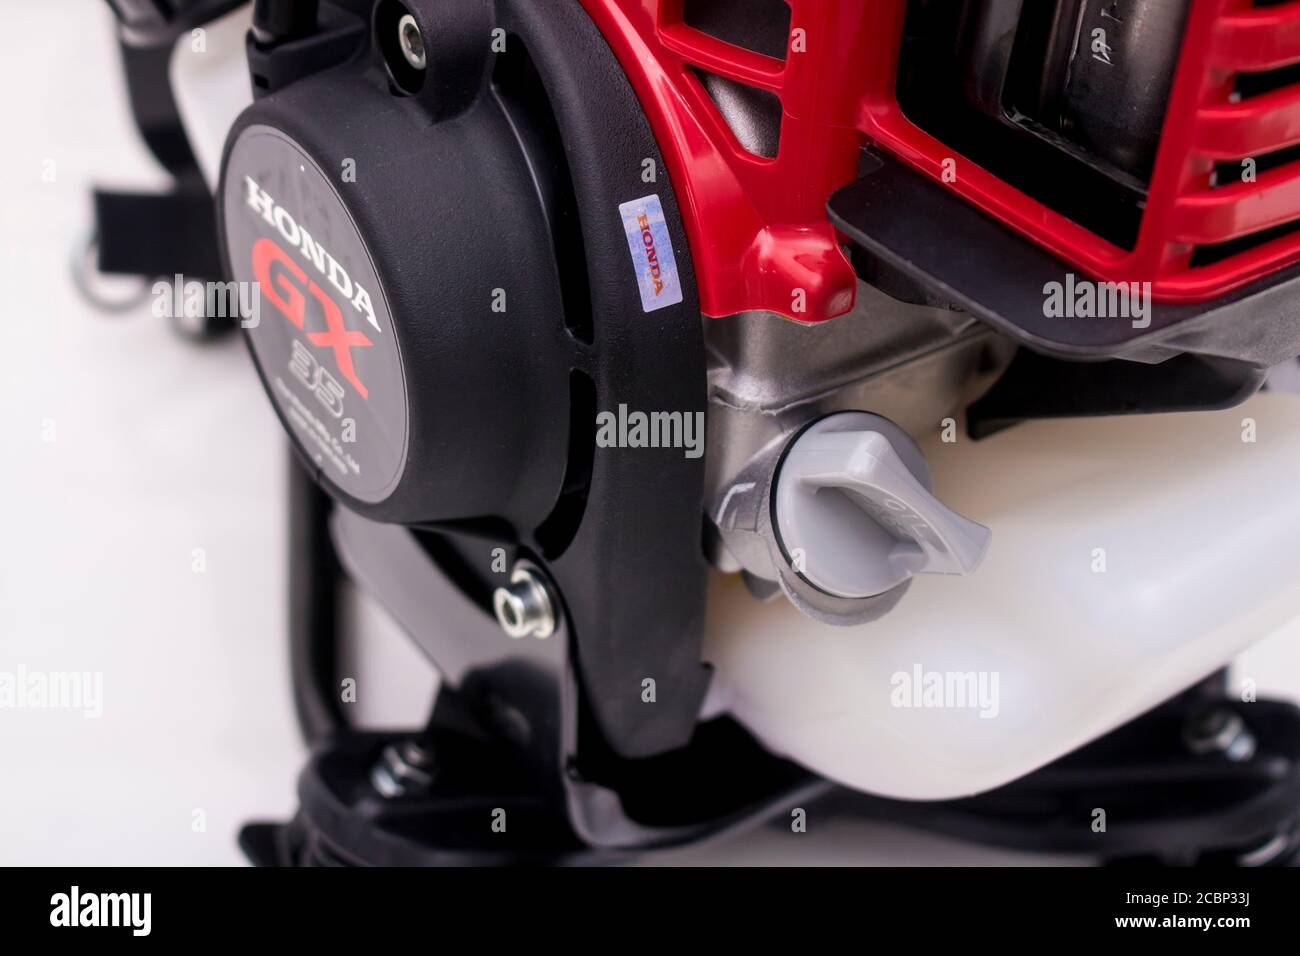 The engine oil tank and its cover of Honda GX35 engine which would be found  in Honda umr435 and umk435 grass trimmer was took a photo under lighting s  Stock Photo -